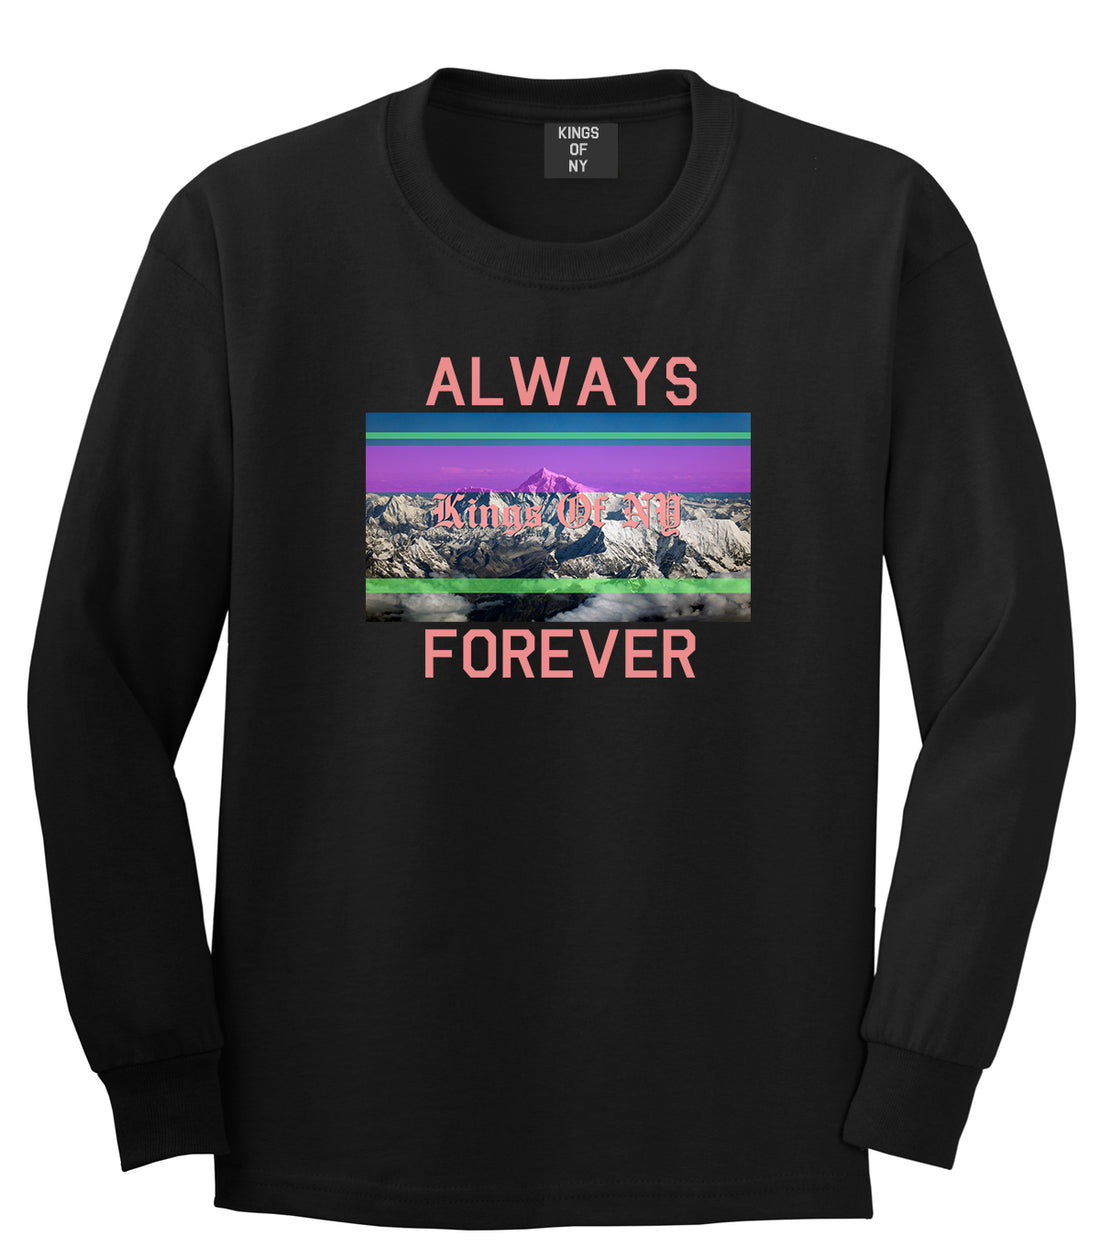 Mountains Always And Forever Mens Long Sleeve T-Shirt Black by Kings Of NY